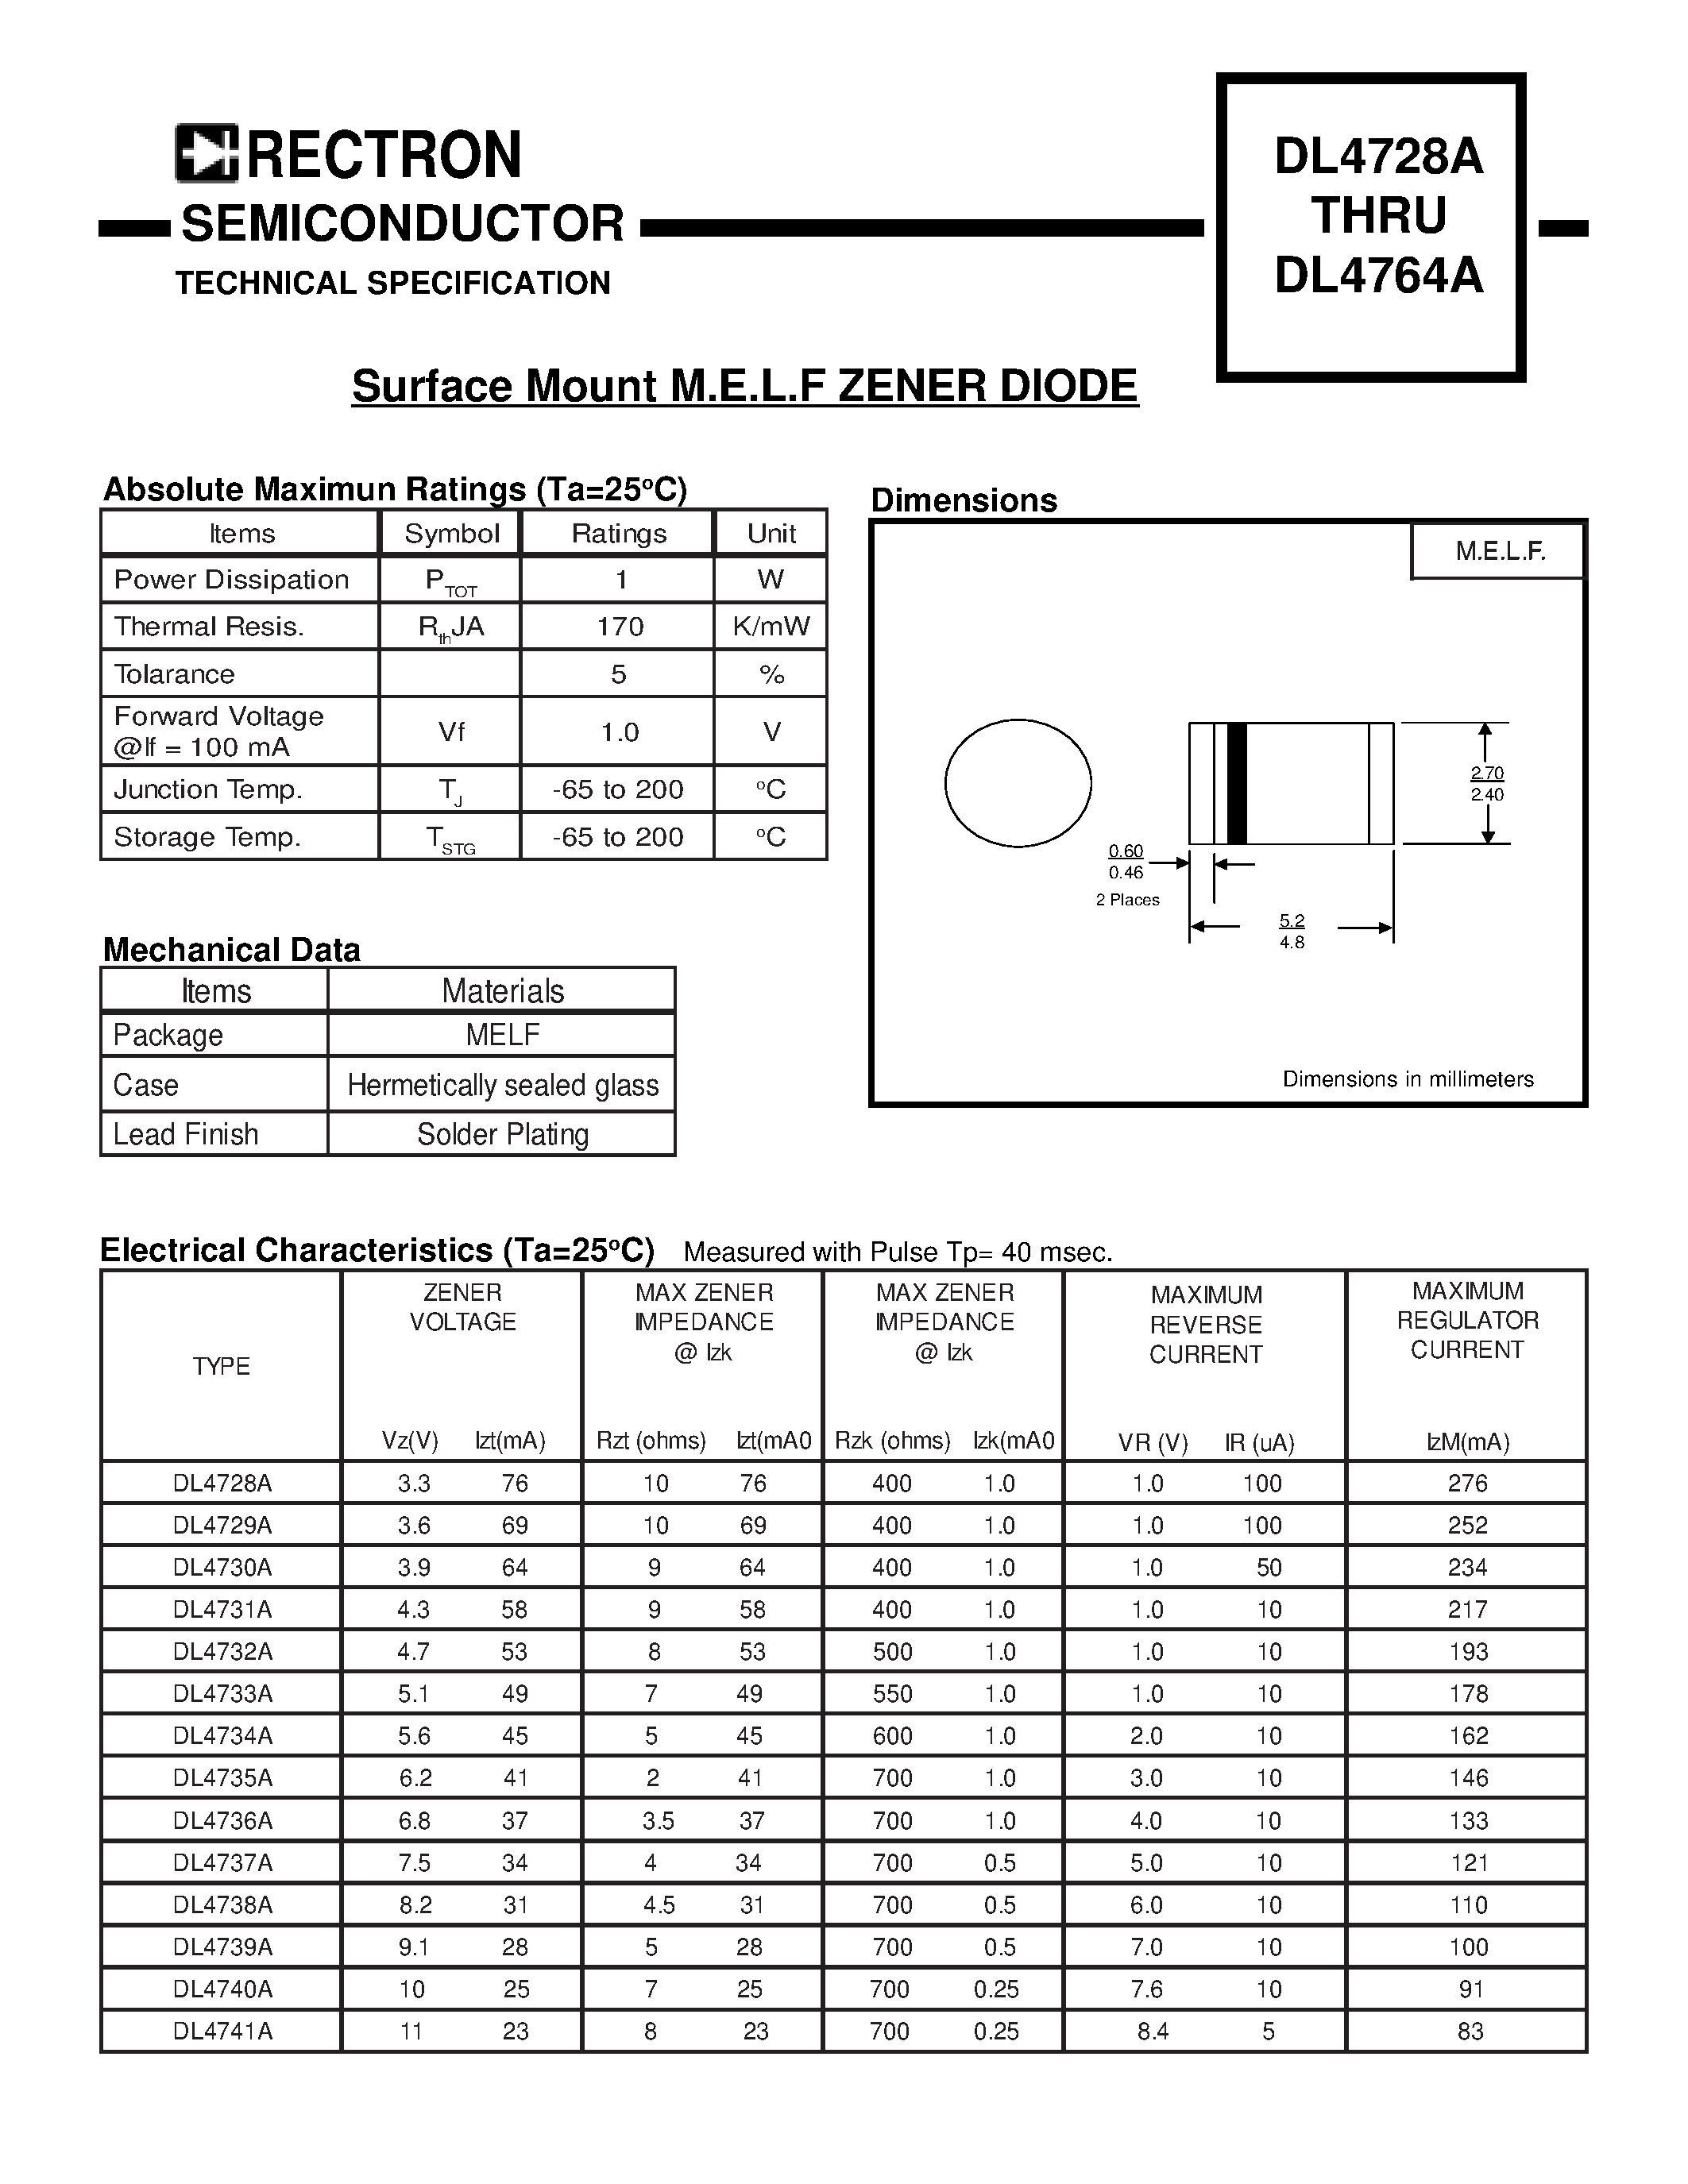 Datasheet DL4730A - Surface Mount M.E.L.F ZENER DIODE page 1